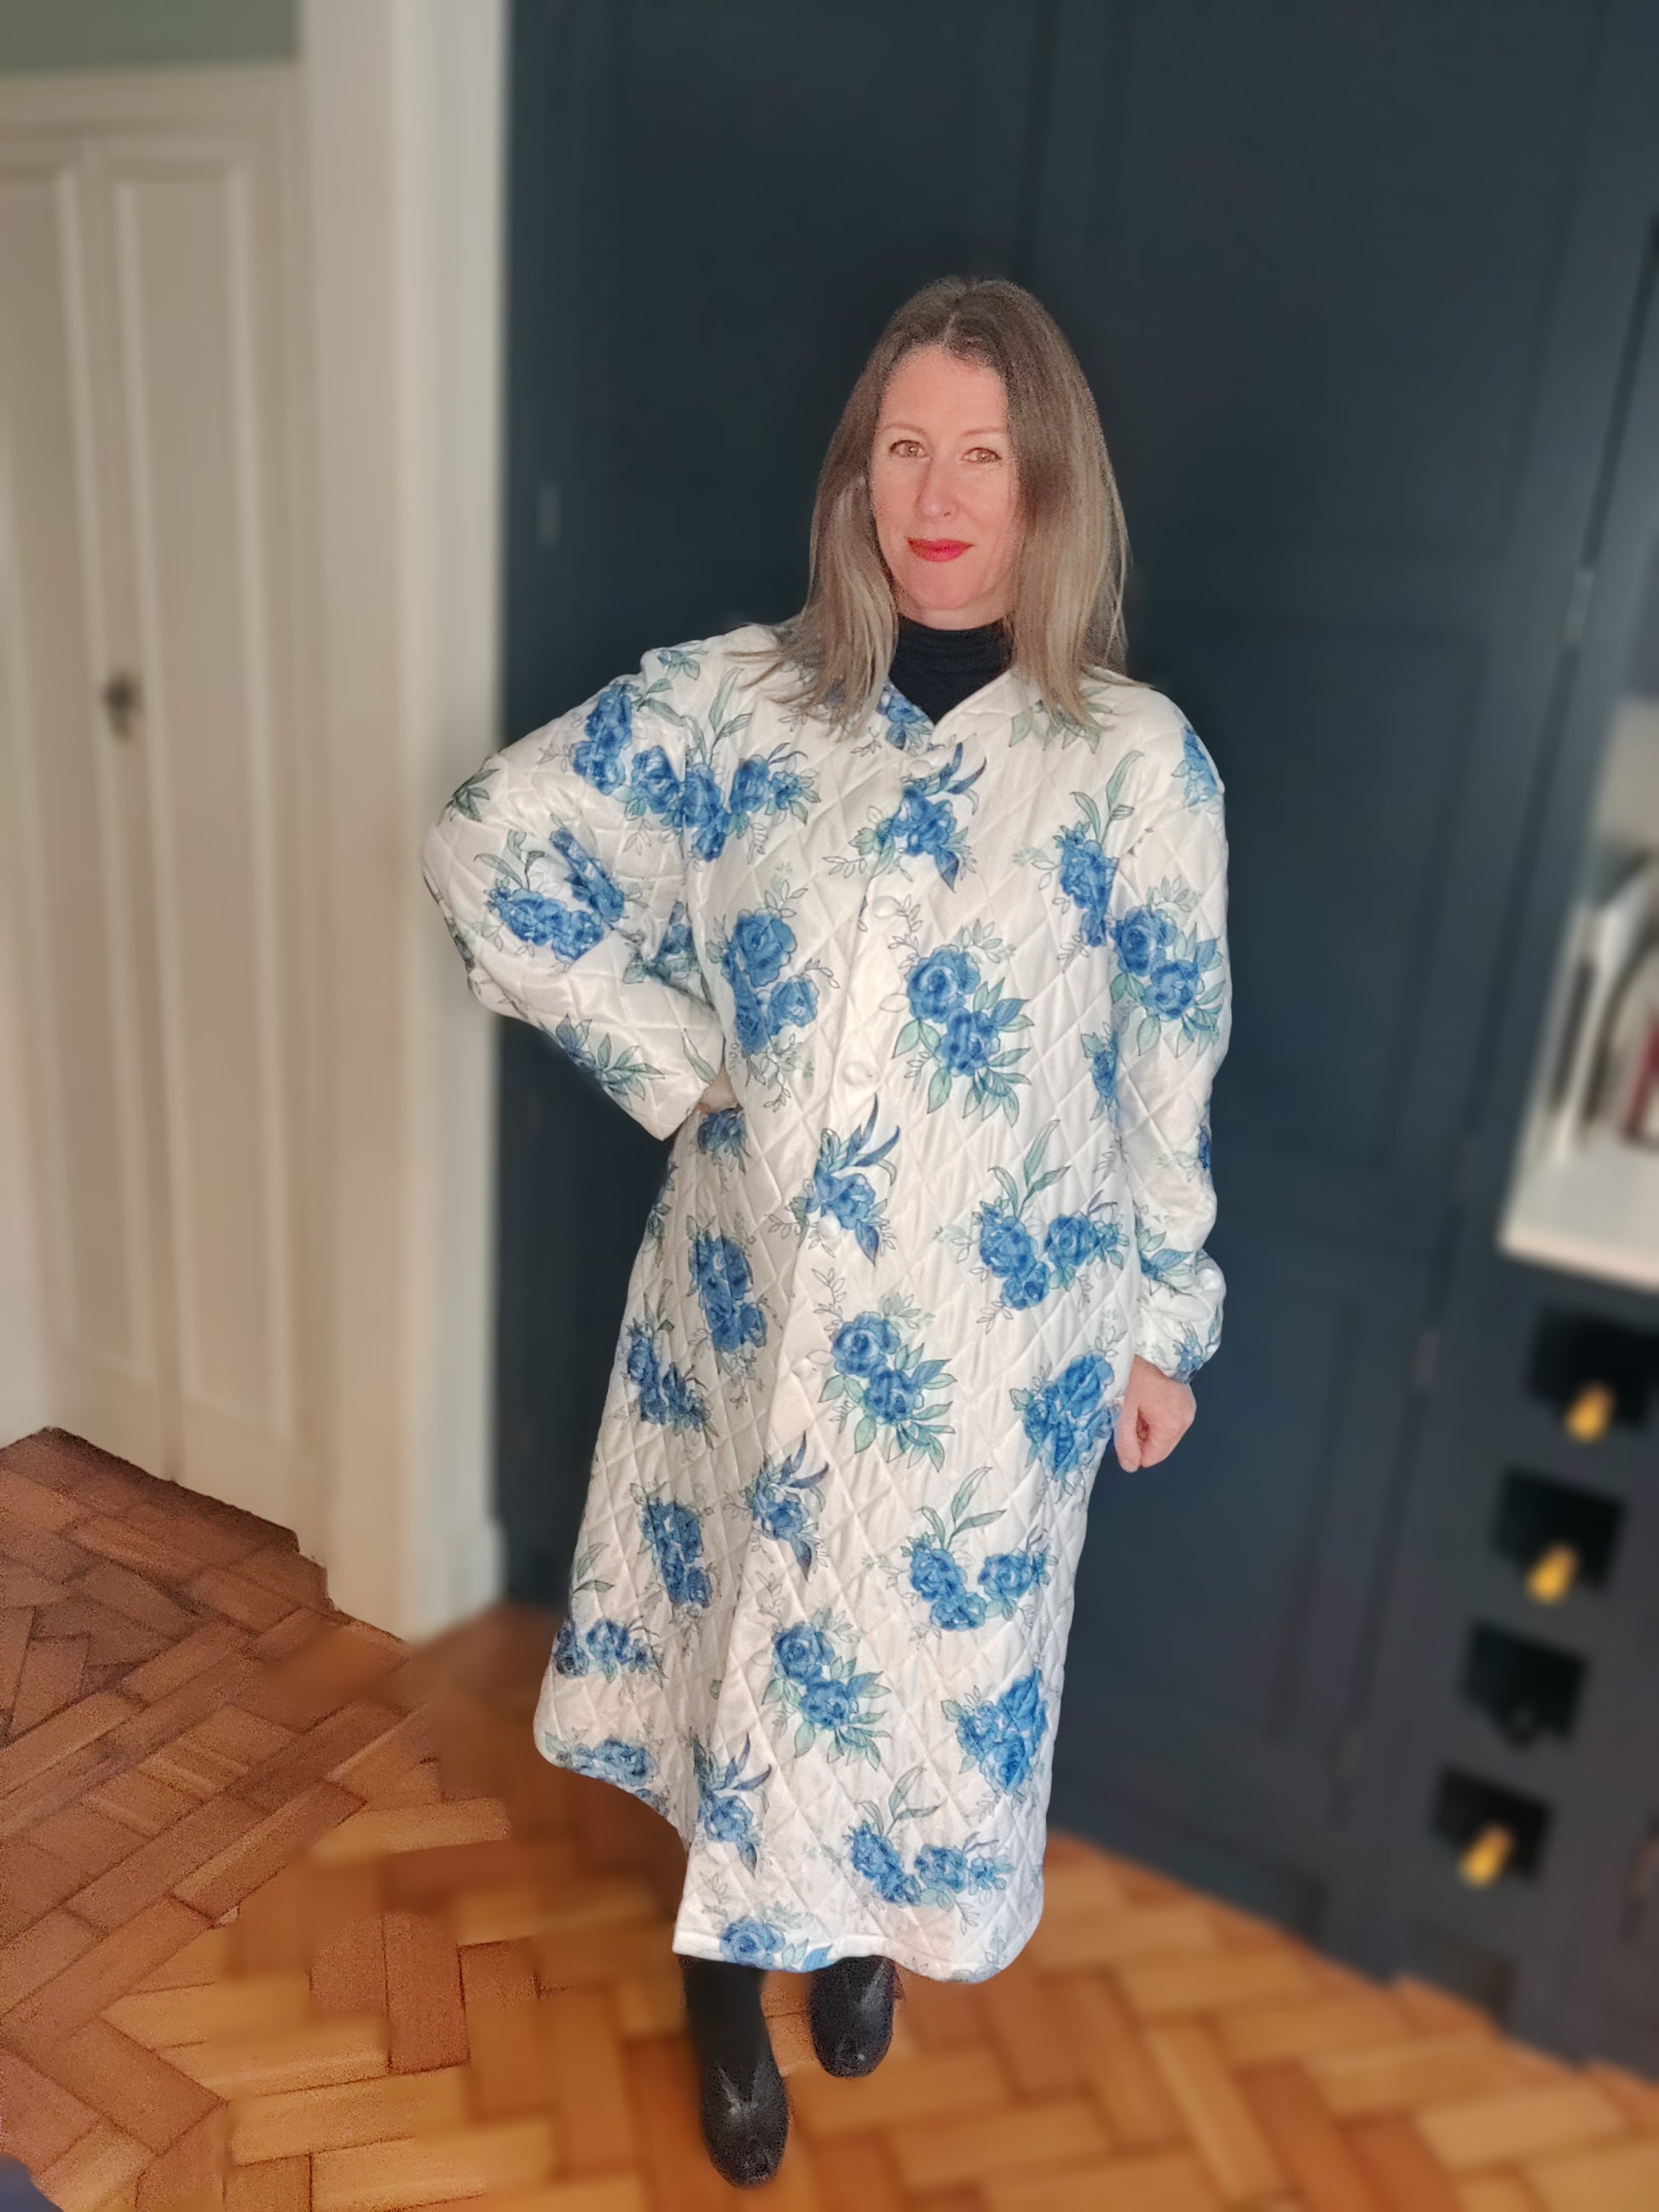 Lovely blue and white vintage housecoat